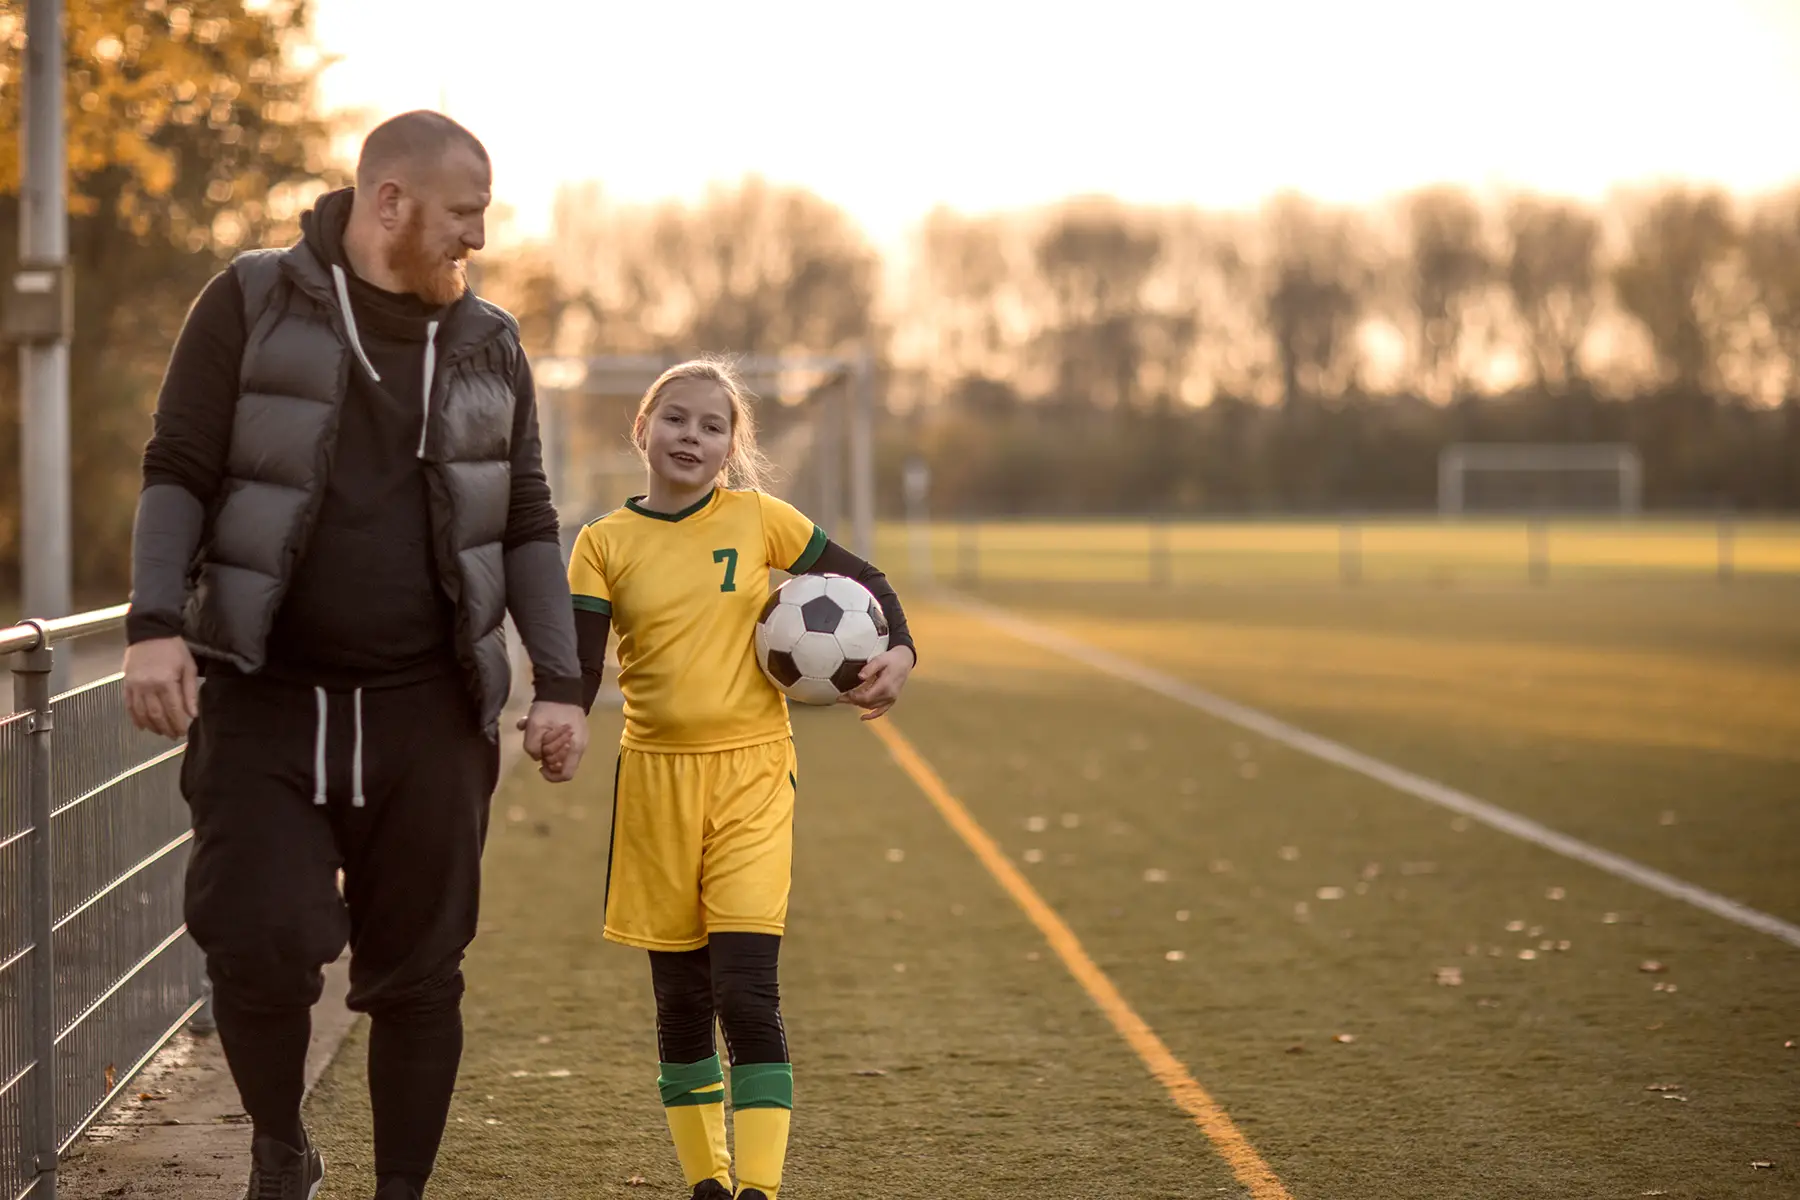 A father with his daughter in a football kit, Autumn day